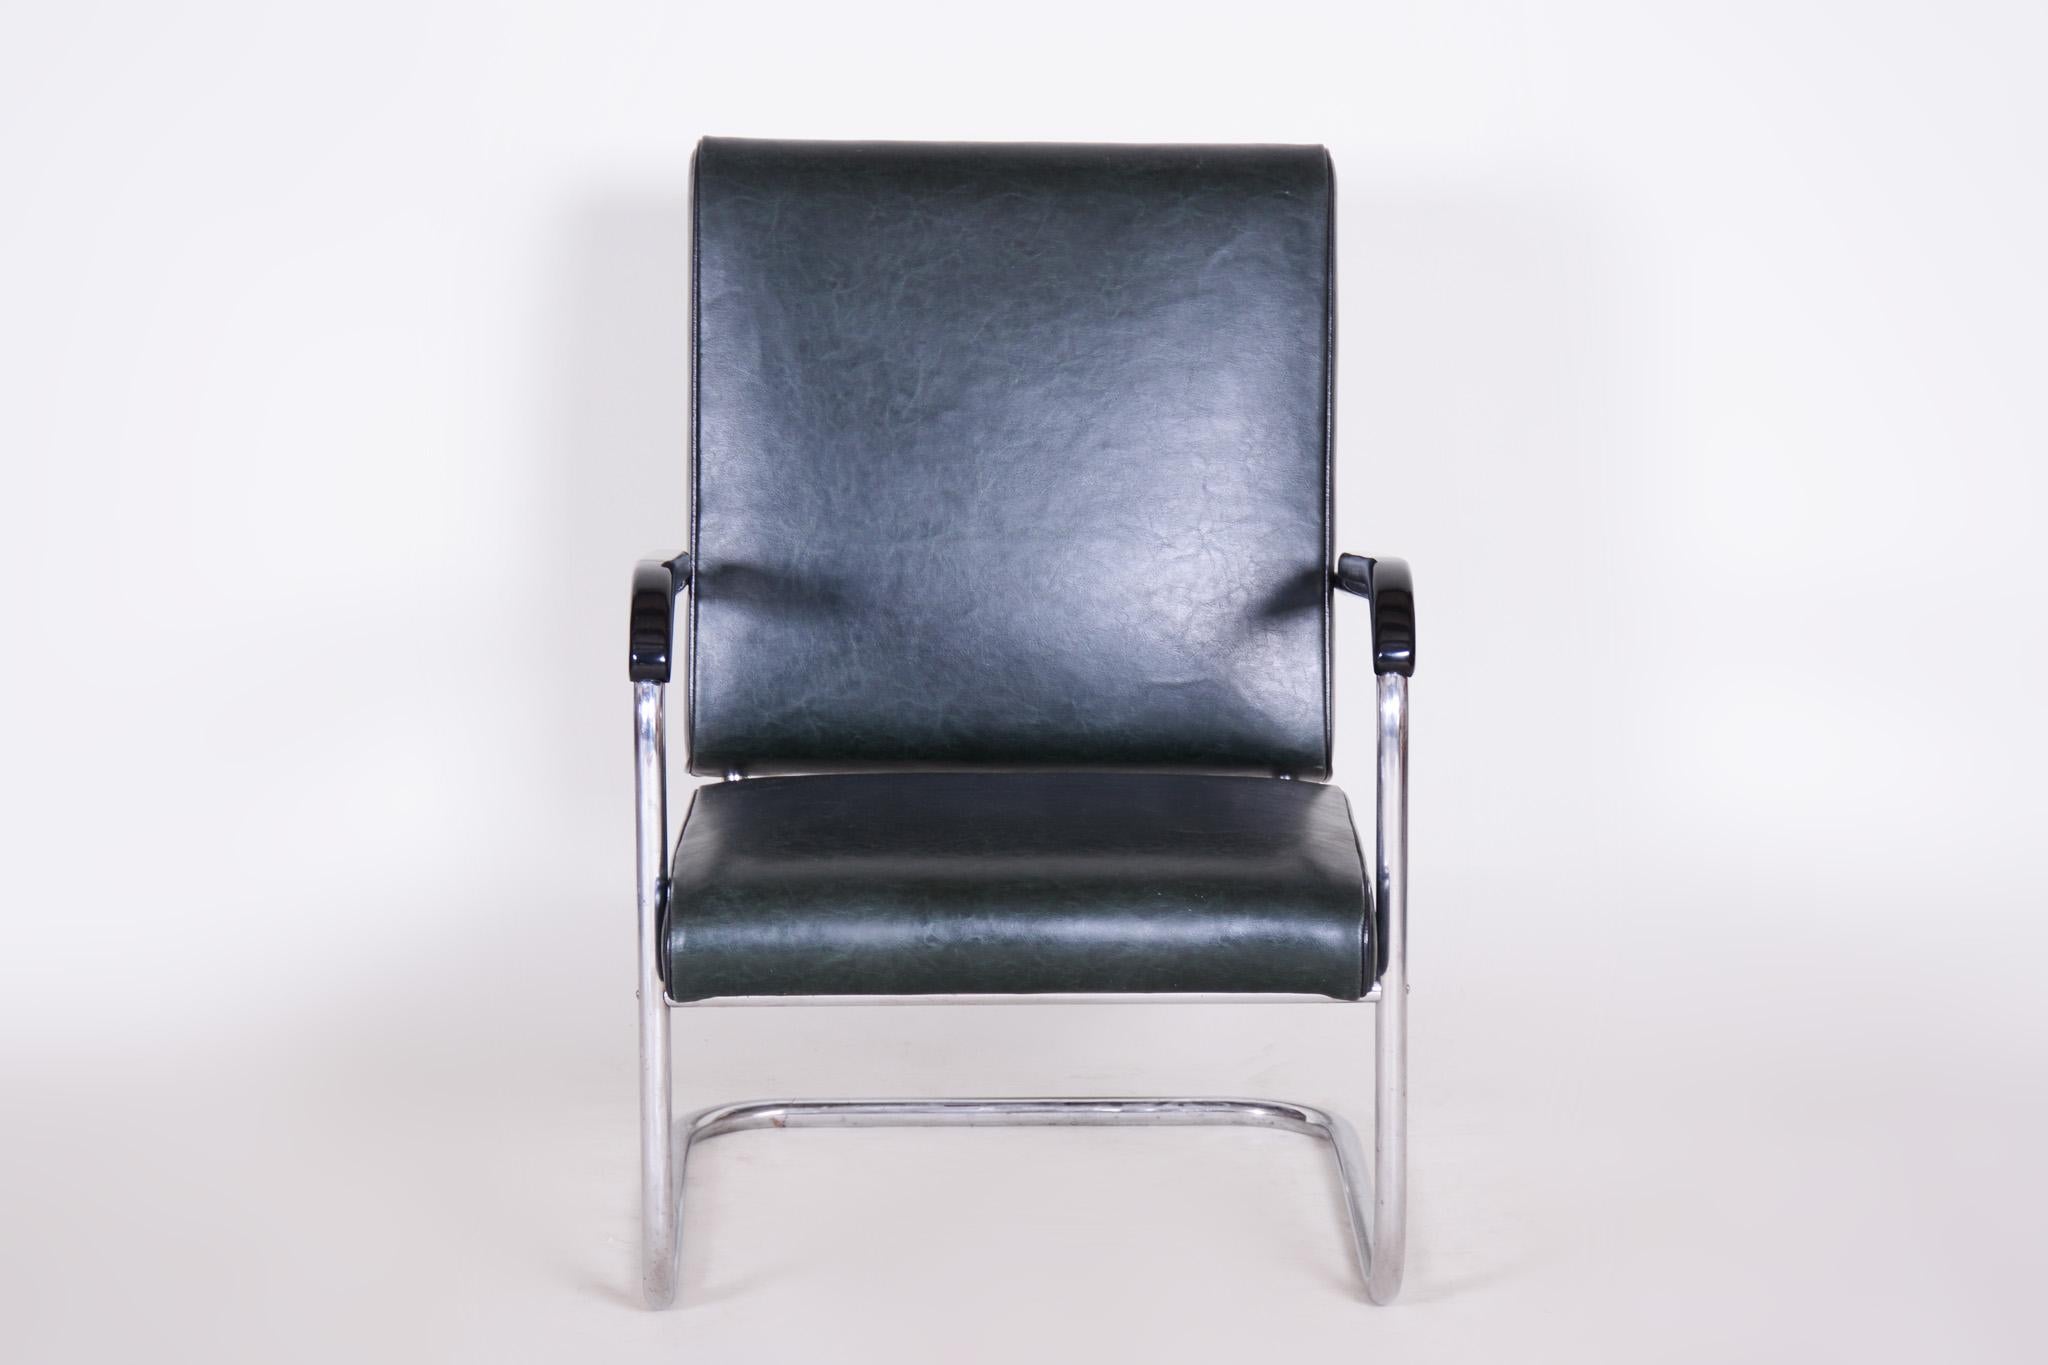 Bauhaus Art Deco armchair.
Completely restored, new upholstery and leather.

Material: Chrome-planted tubular steel and high quality leather
Source: Czechia (Czechoslovakia)
Maker: SAB (ZUKOV after nationalization)
Period: 1930-1939.